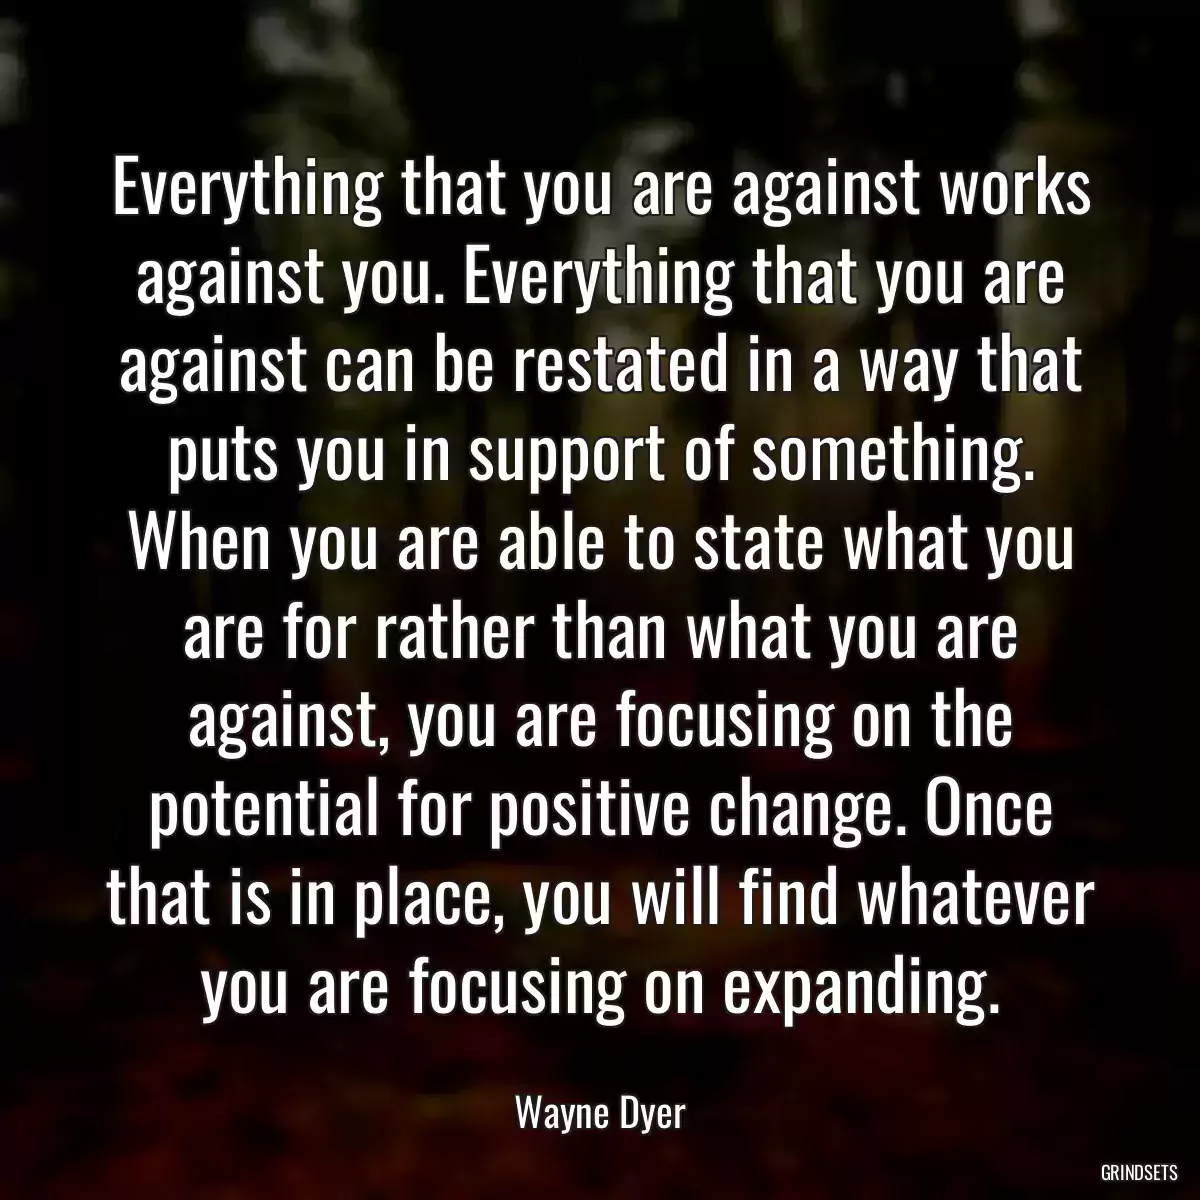 Everything that you are against works against you. Everything that you are against can be restated in a way that puts you in support of something. When you are able to state what you are for rather than what you are against, you are focusing on the potential for positive change. Once that is in place, you will find whatever you are focusing on expanding.